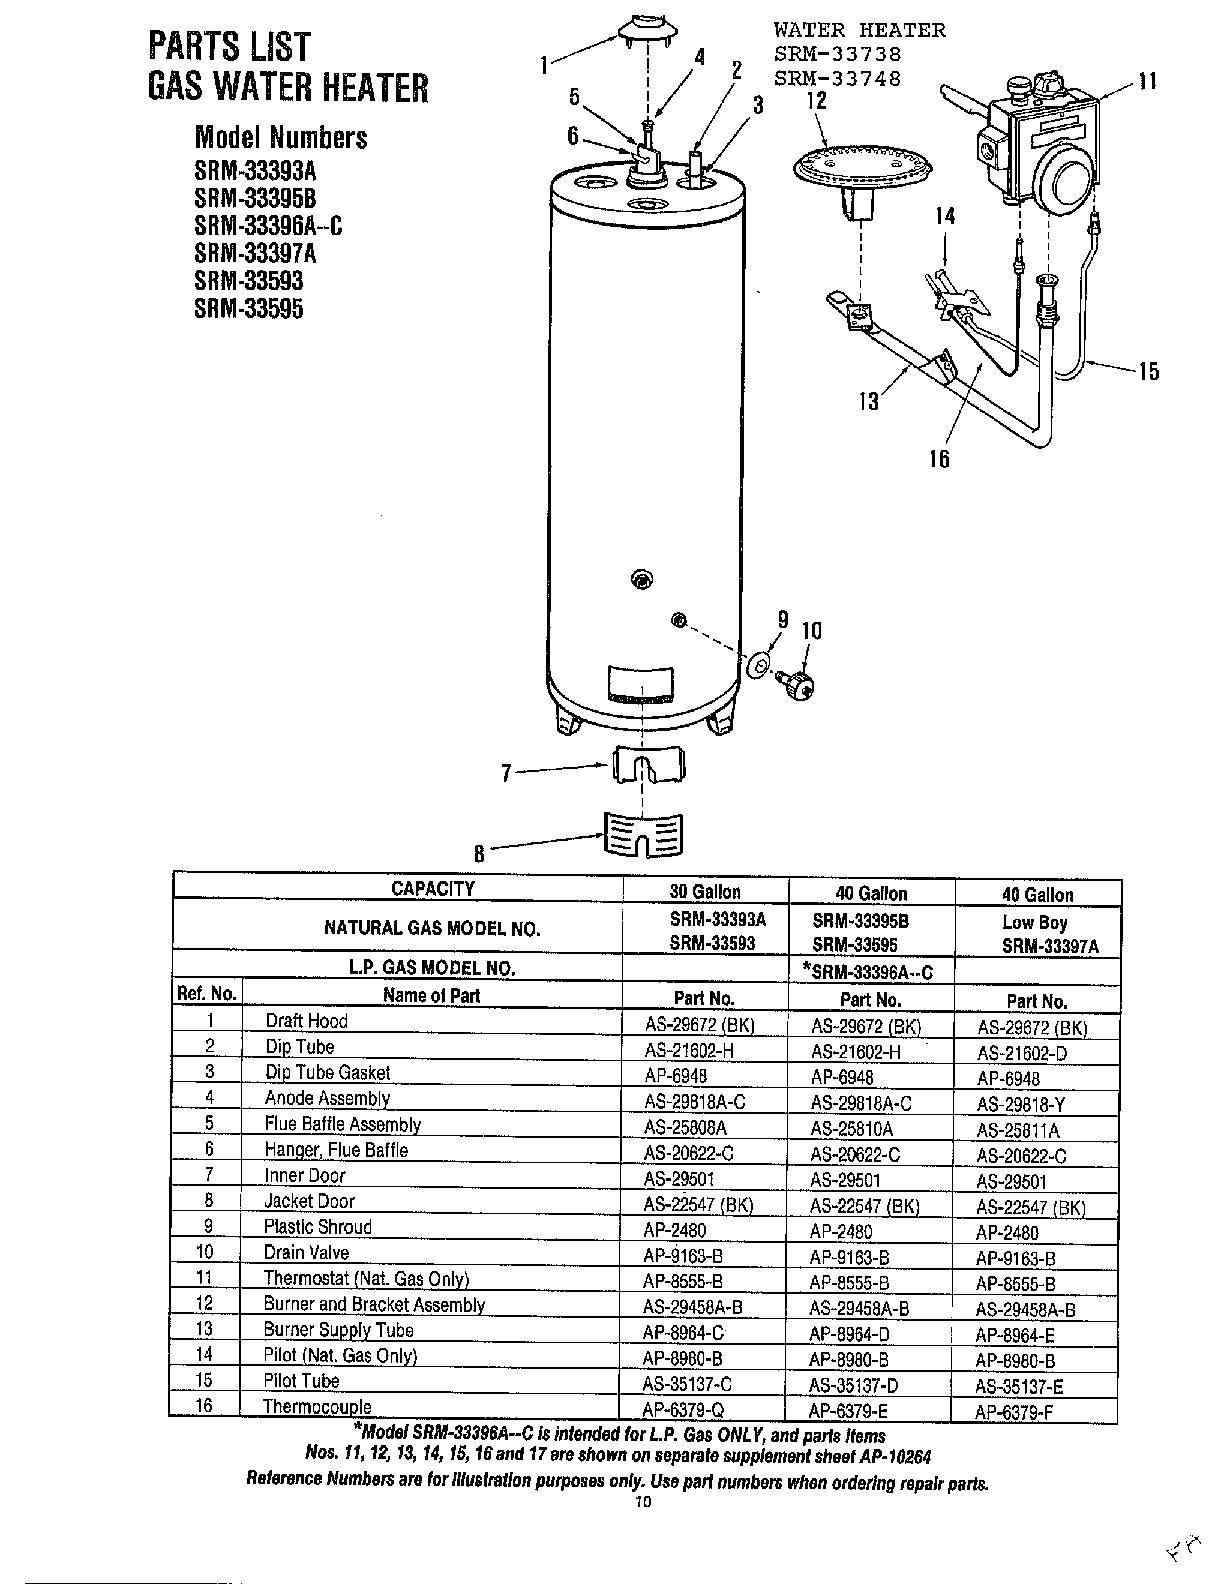 Gas Water Heater Diagram  U0026 Parts List For Model 33396ac